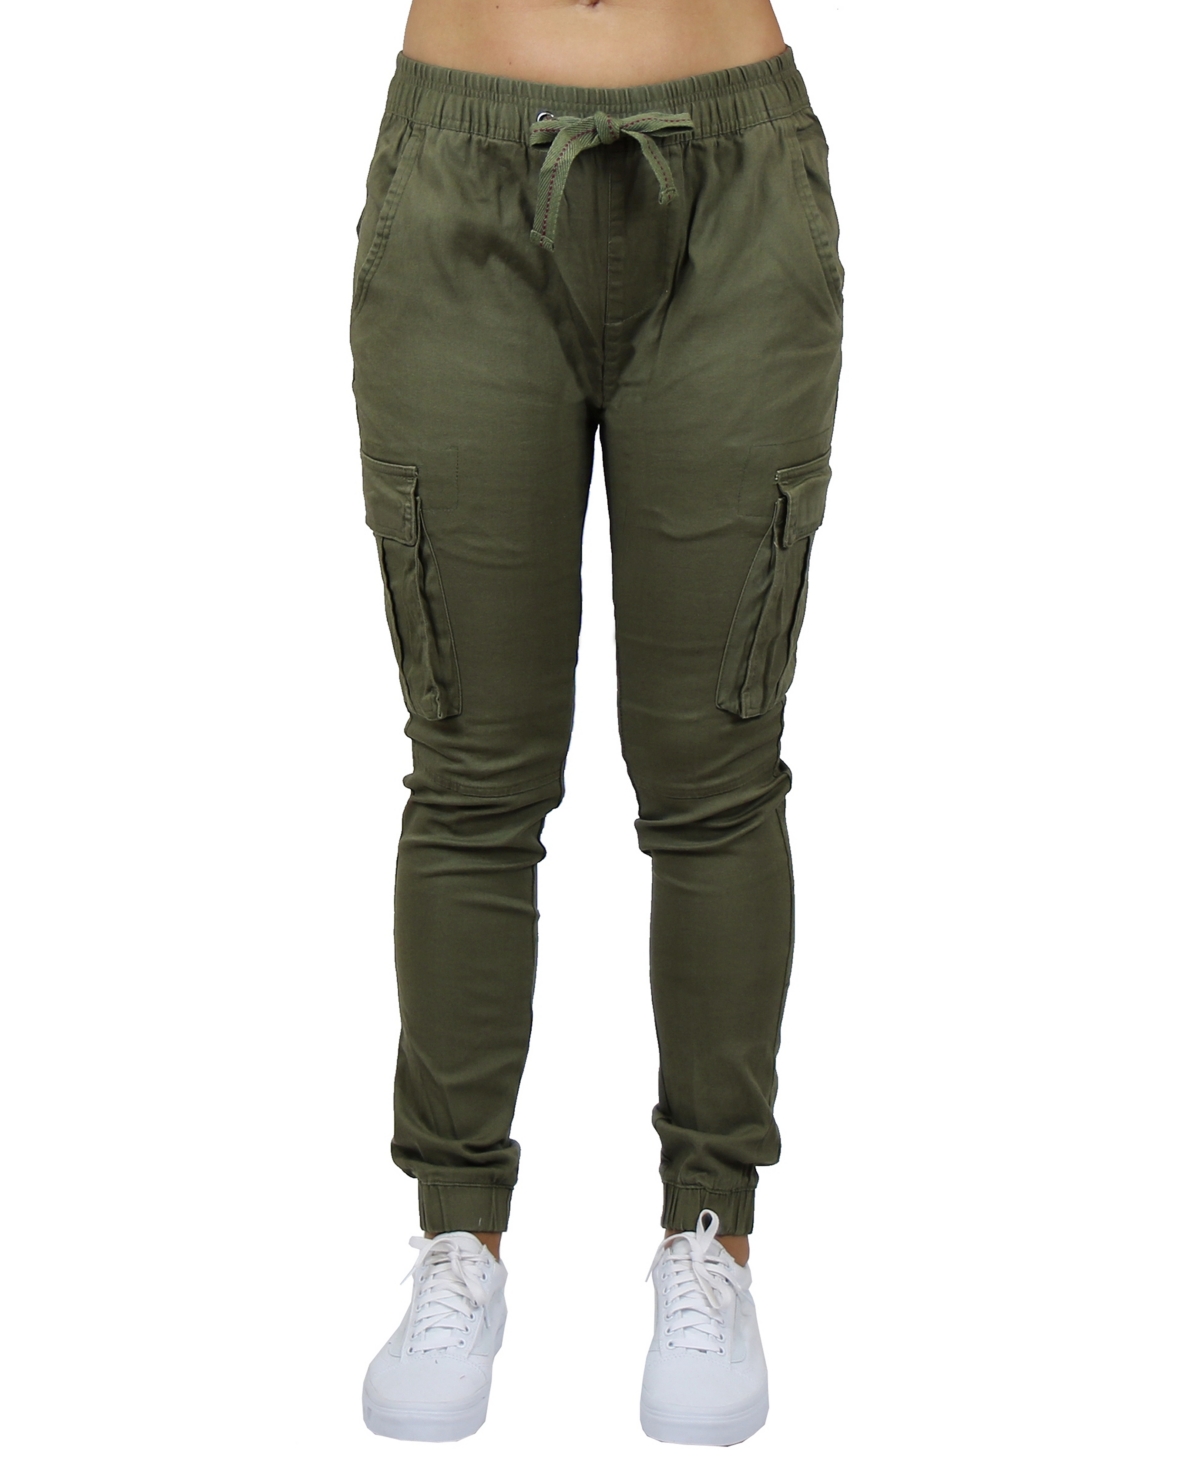 Women's Loose Fit Cotton Stretch Twill Cargo Joggers - Woodland